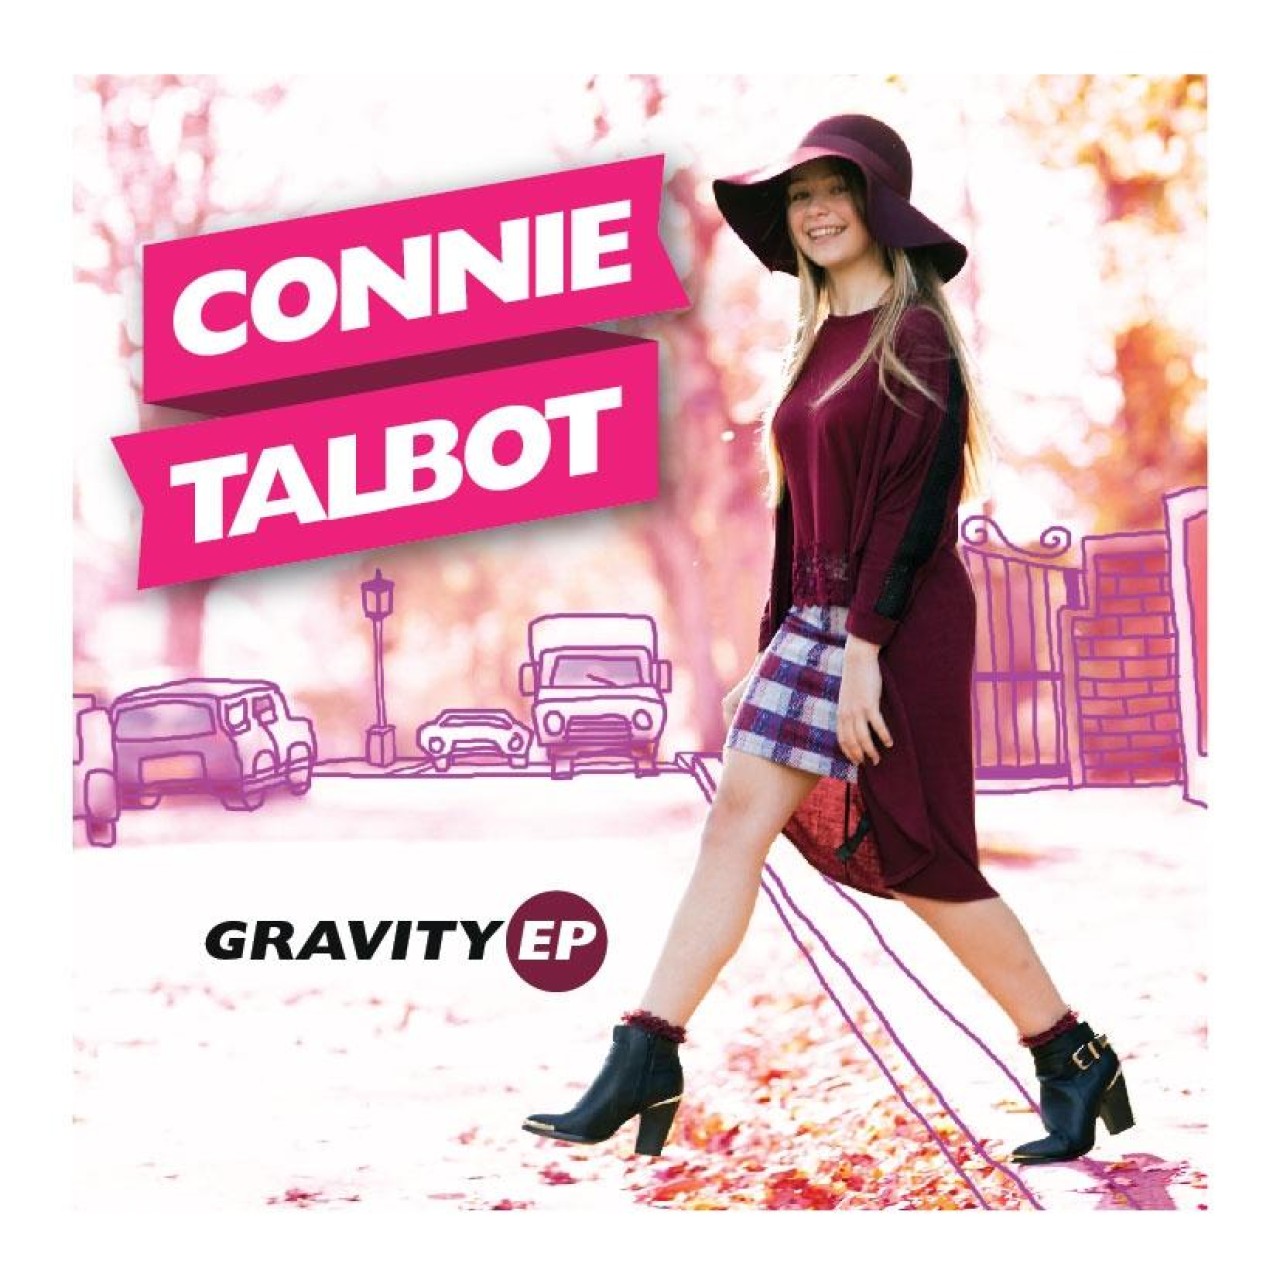 Connie Talbot shares her stunning, coming-of-age EP 'Growing Pains